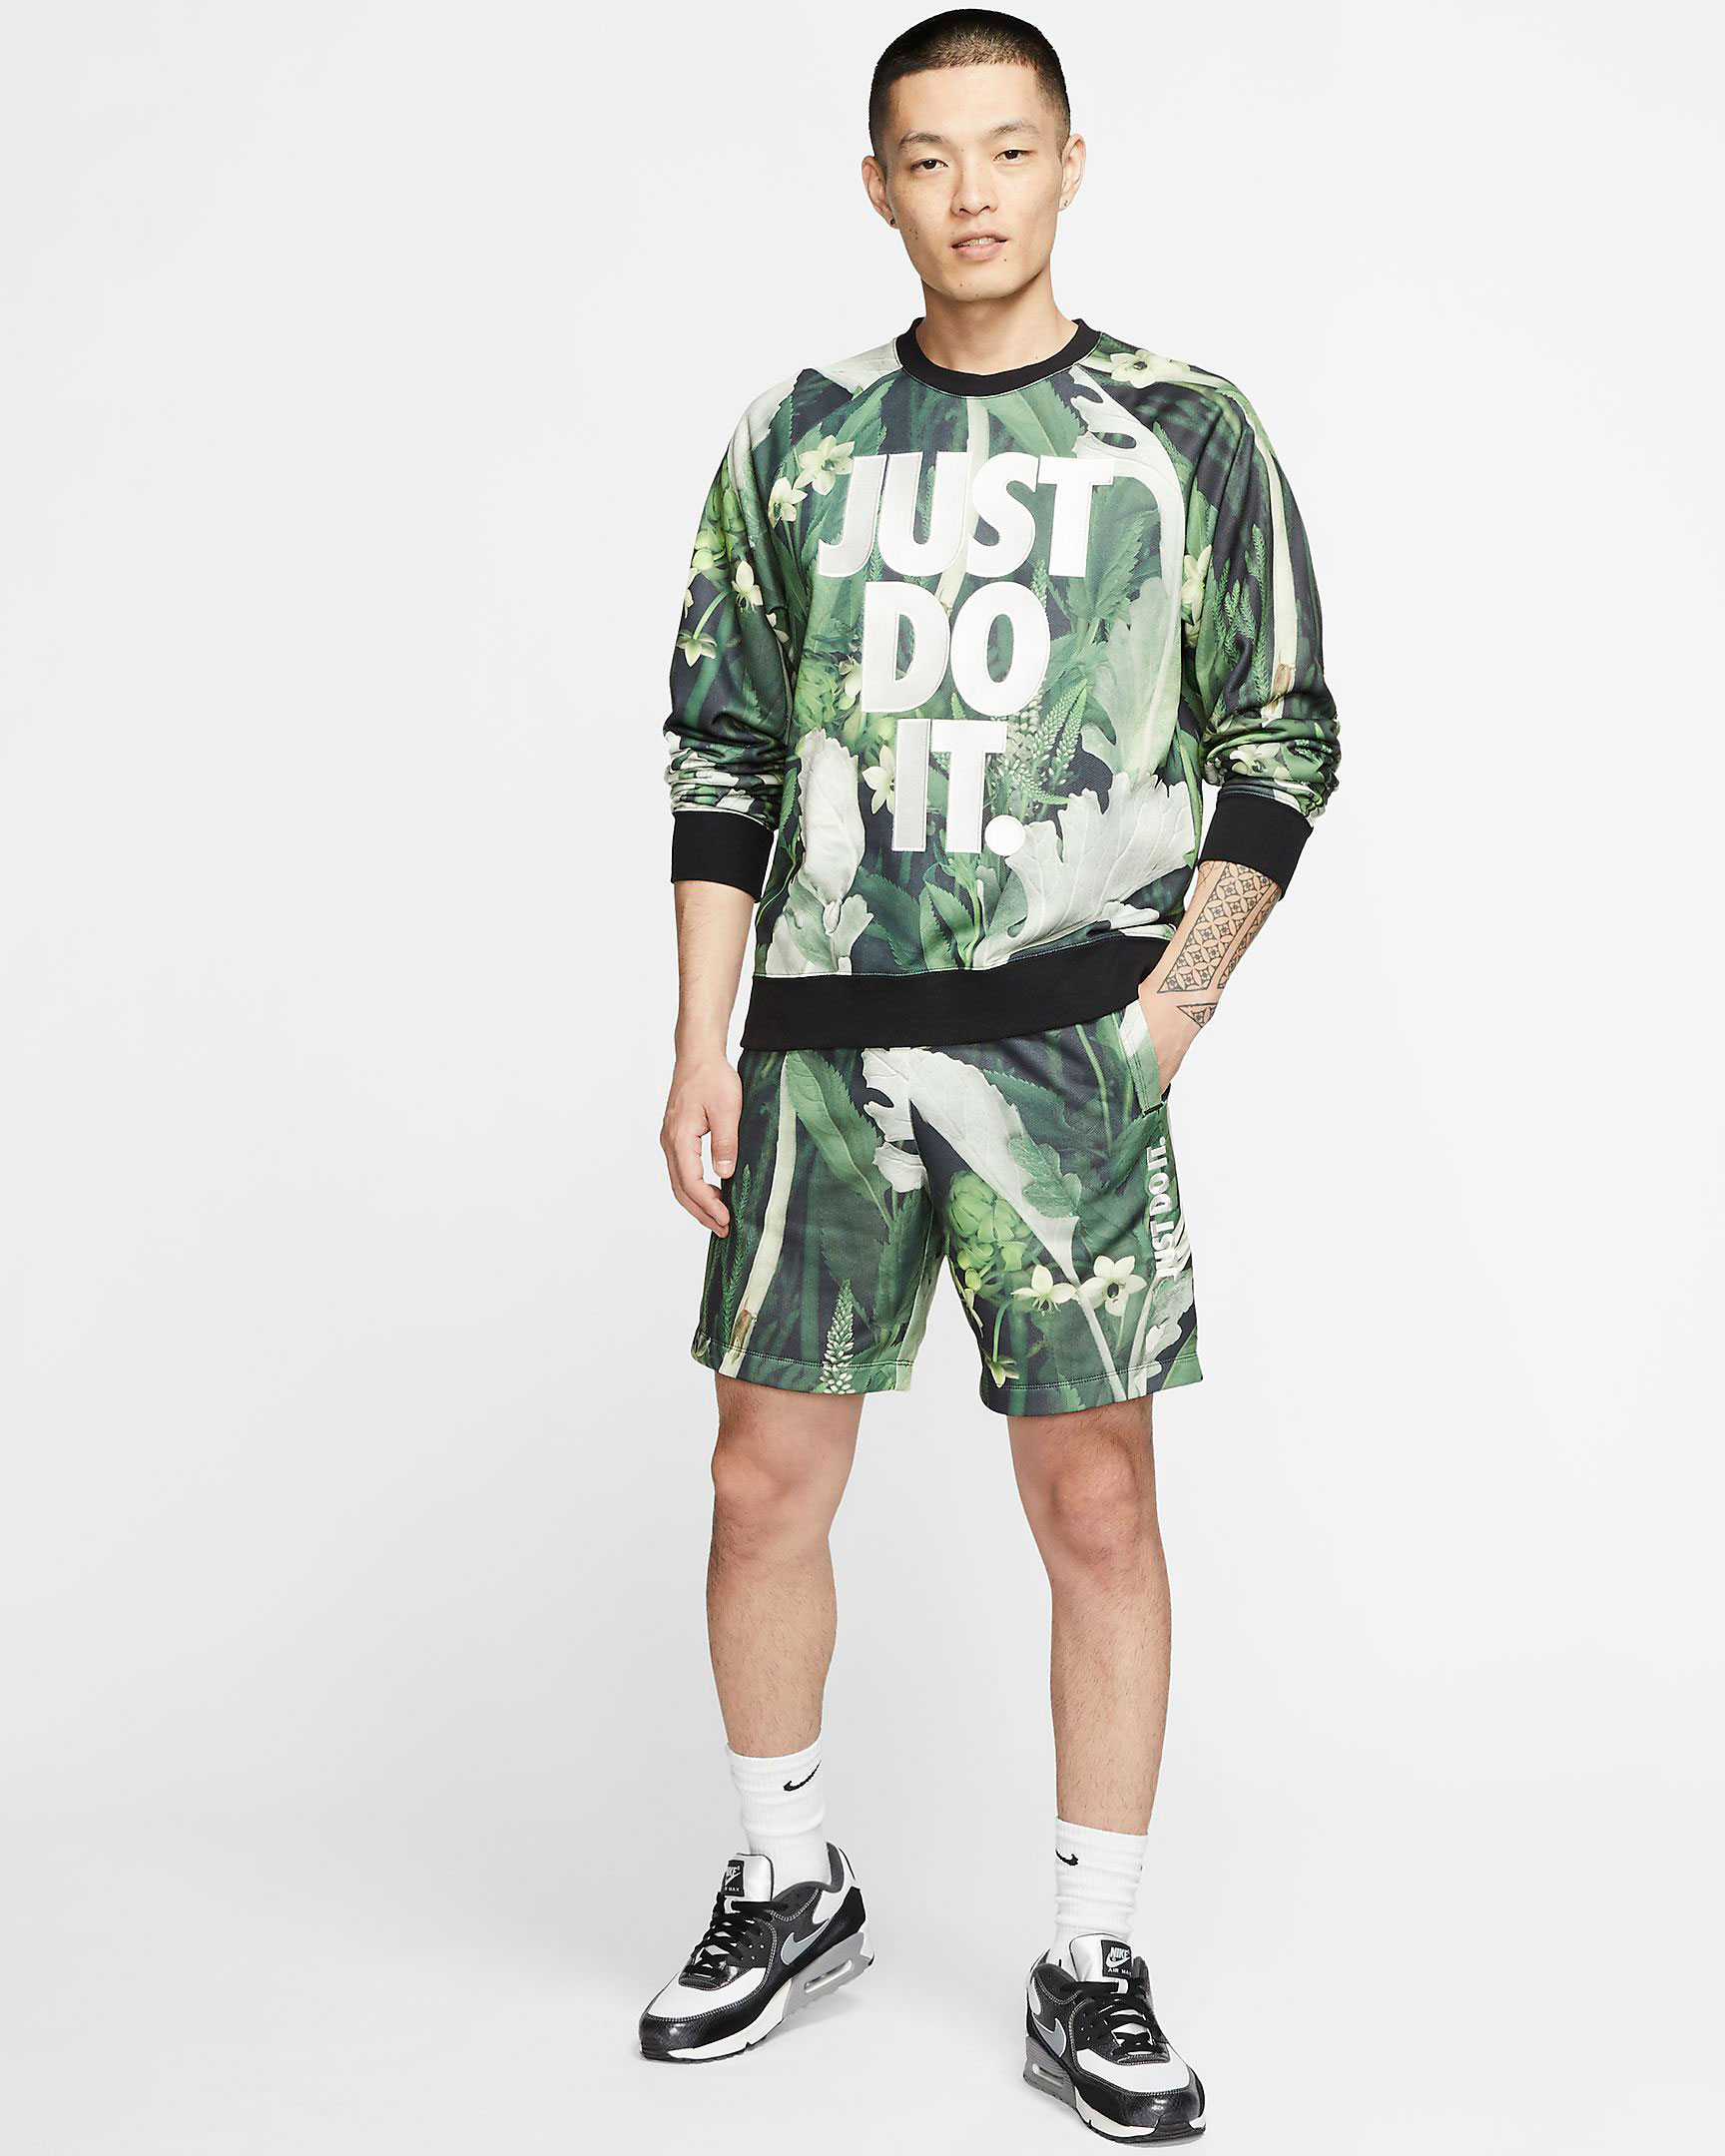 nike-just-do-it-floral-green-outfit